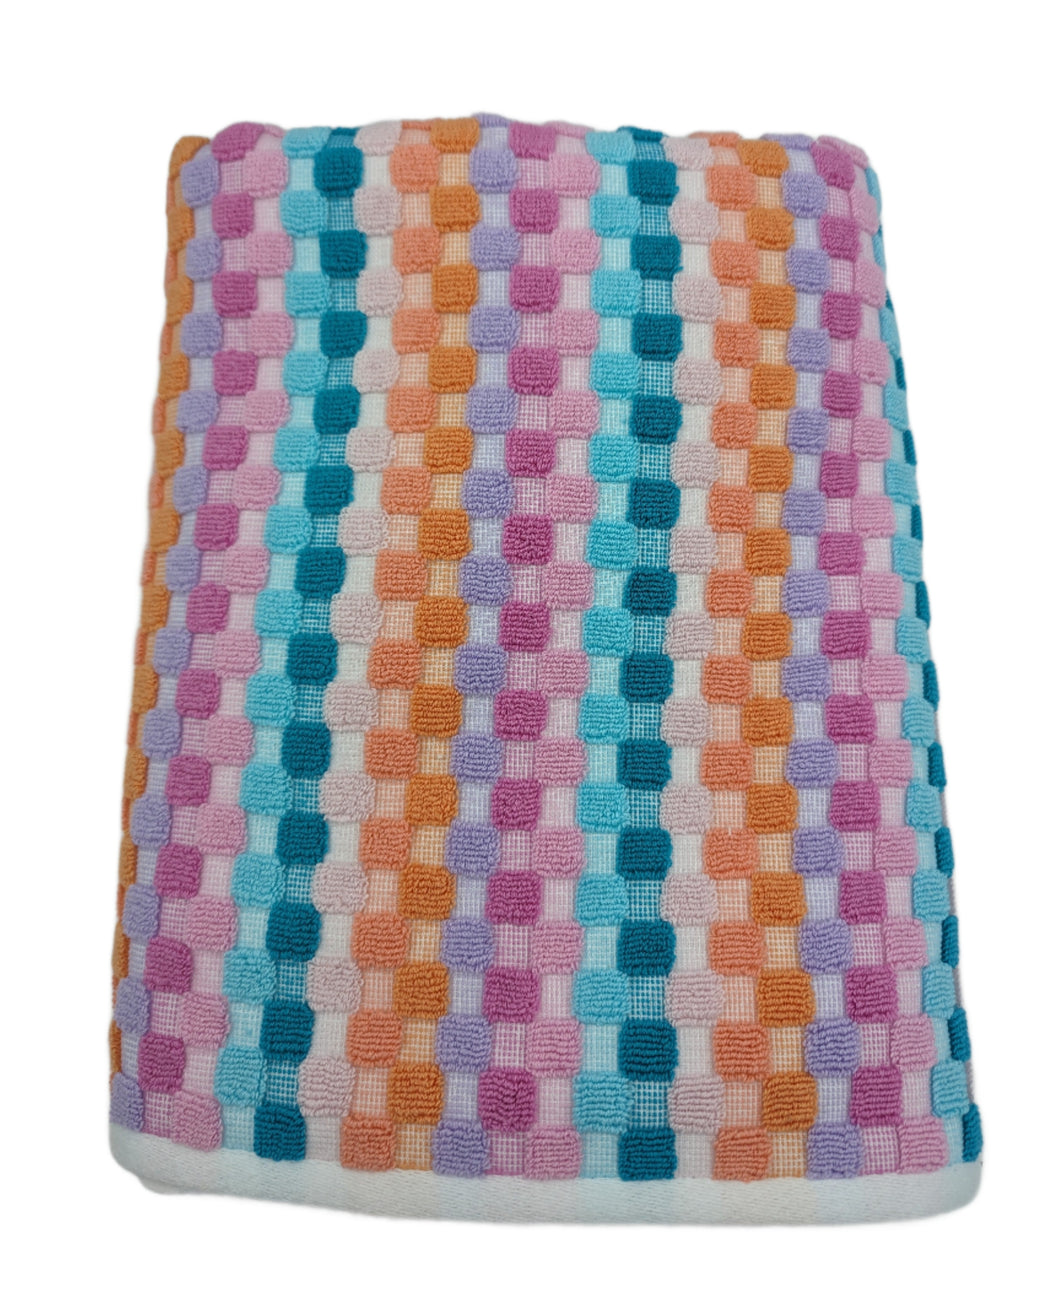 Hooded Towel - Cotton Candy